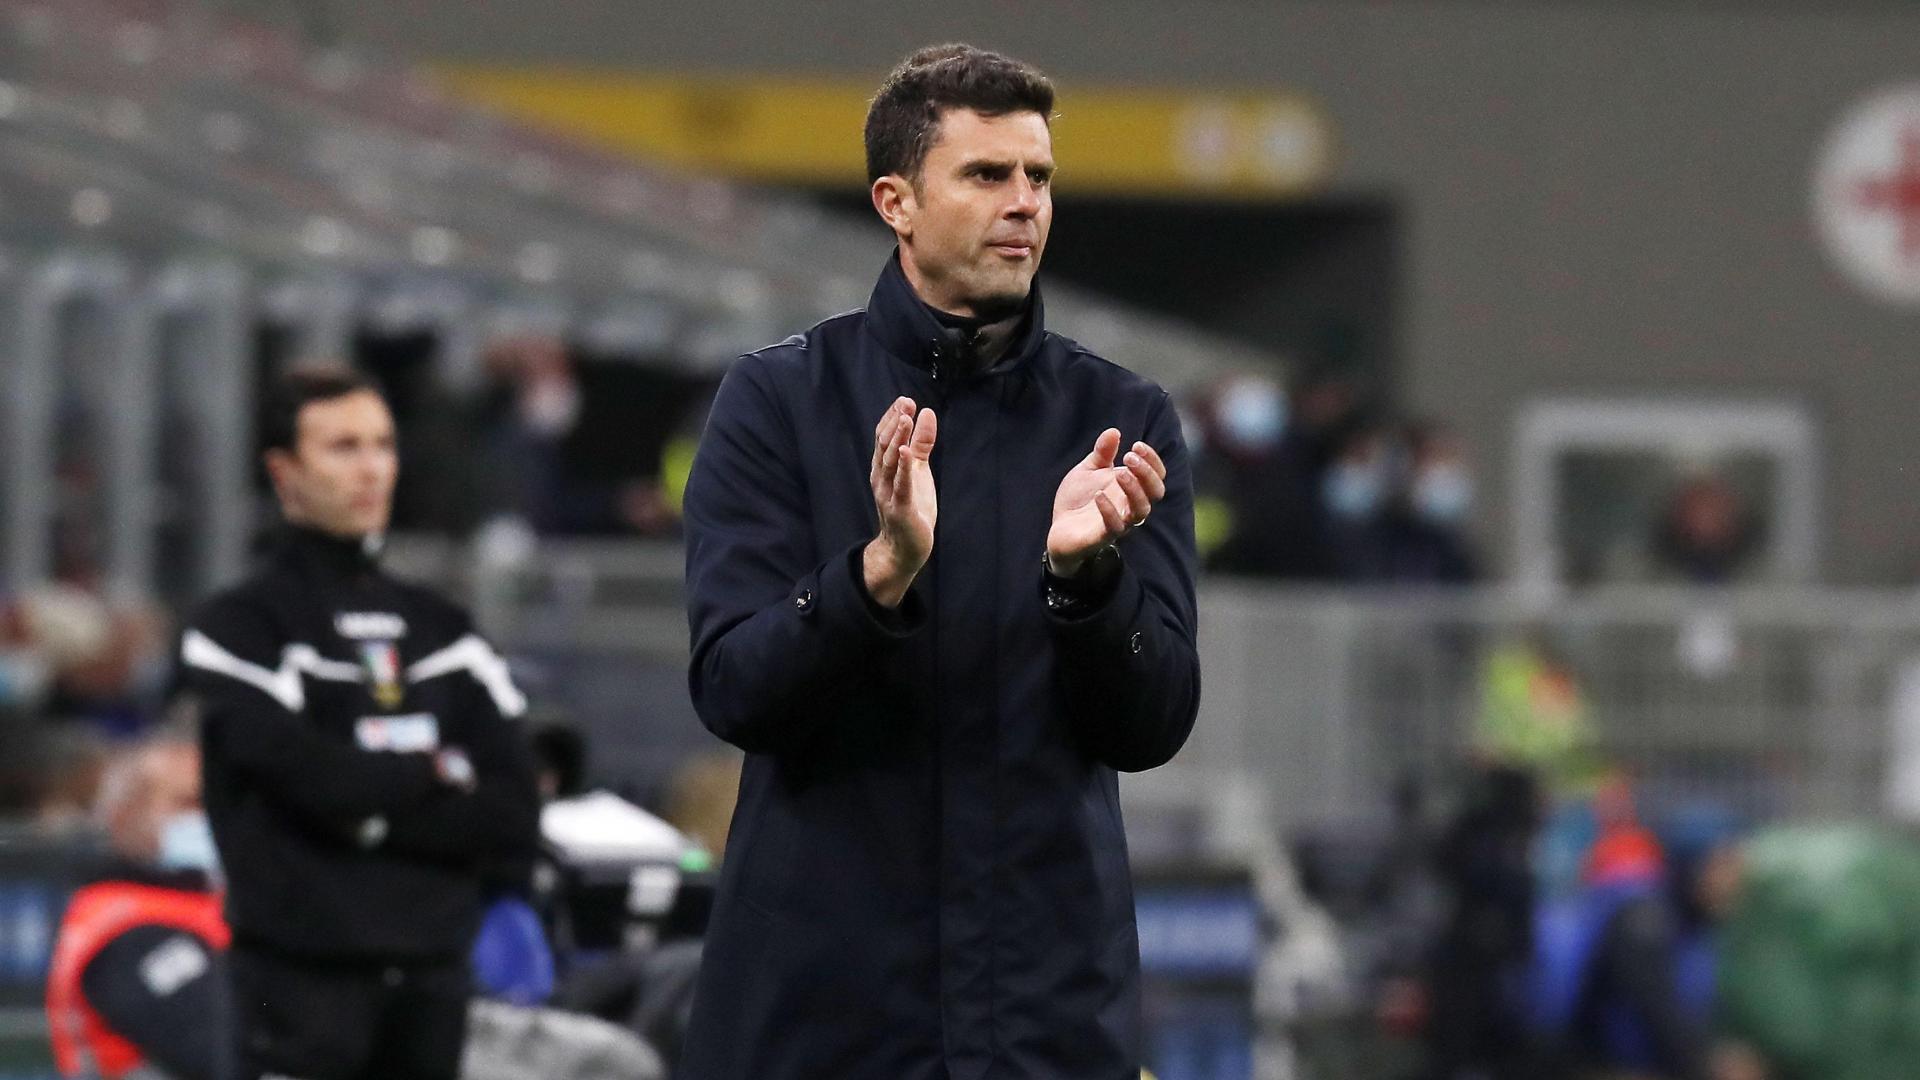 Thiago Motta: "Inter is a great team, but some episodes are hard to understand and accept"